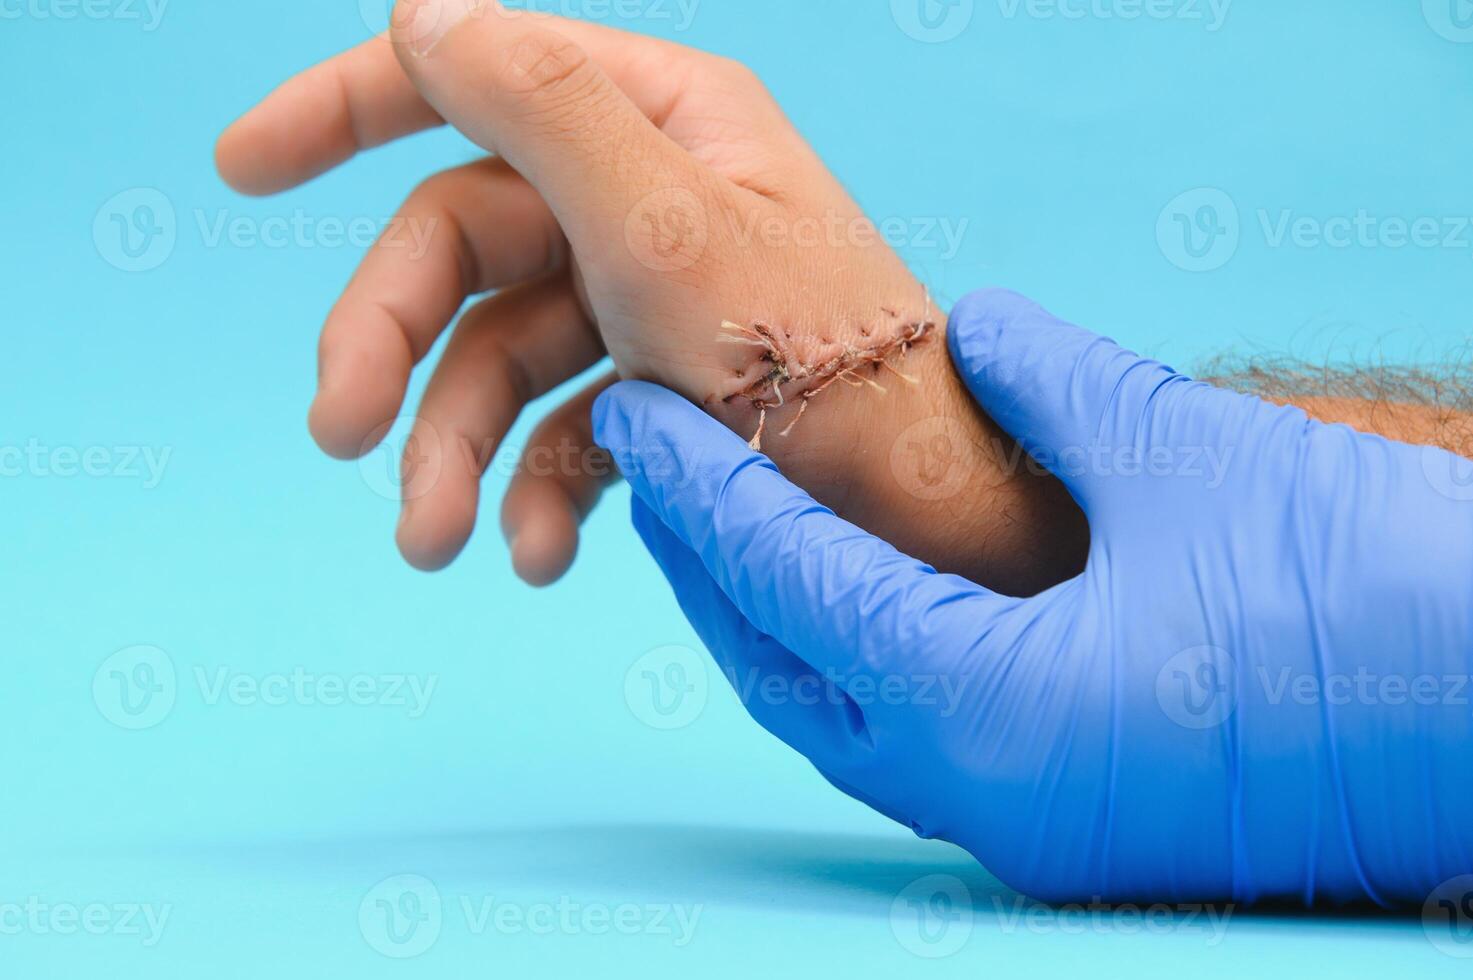 examination by a doctor of a cut on the arm photo